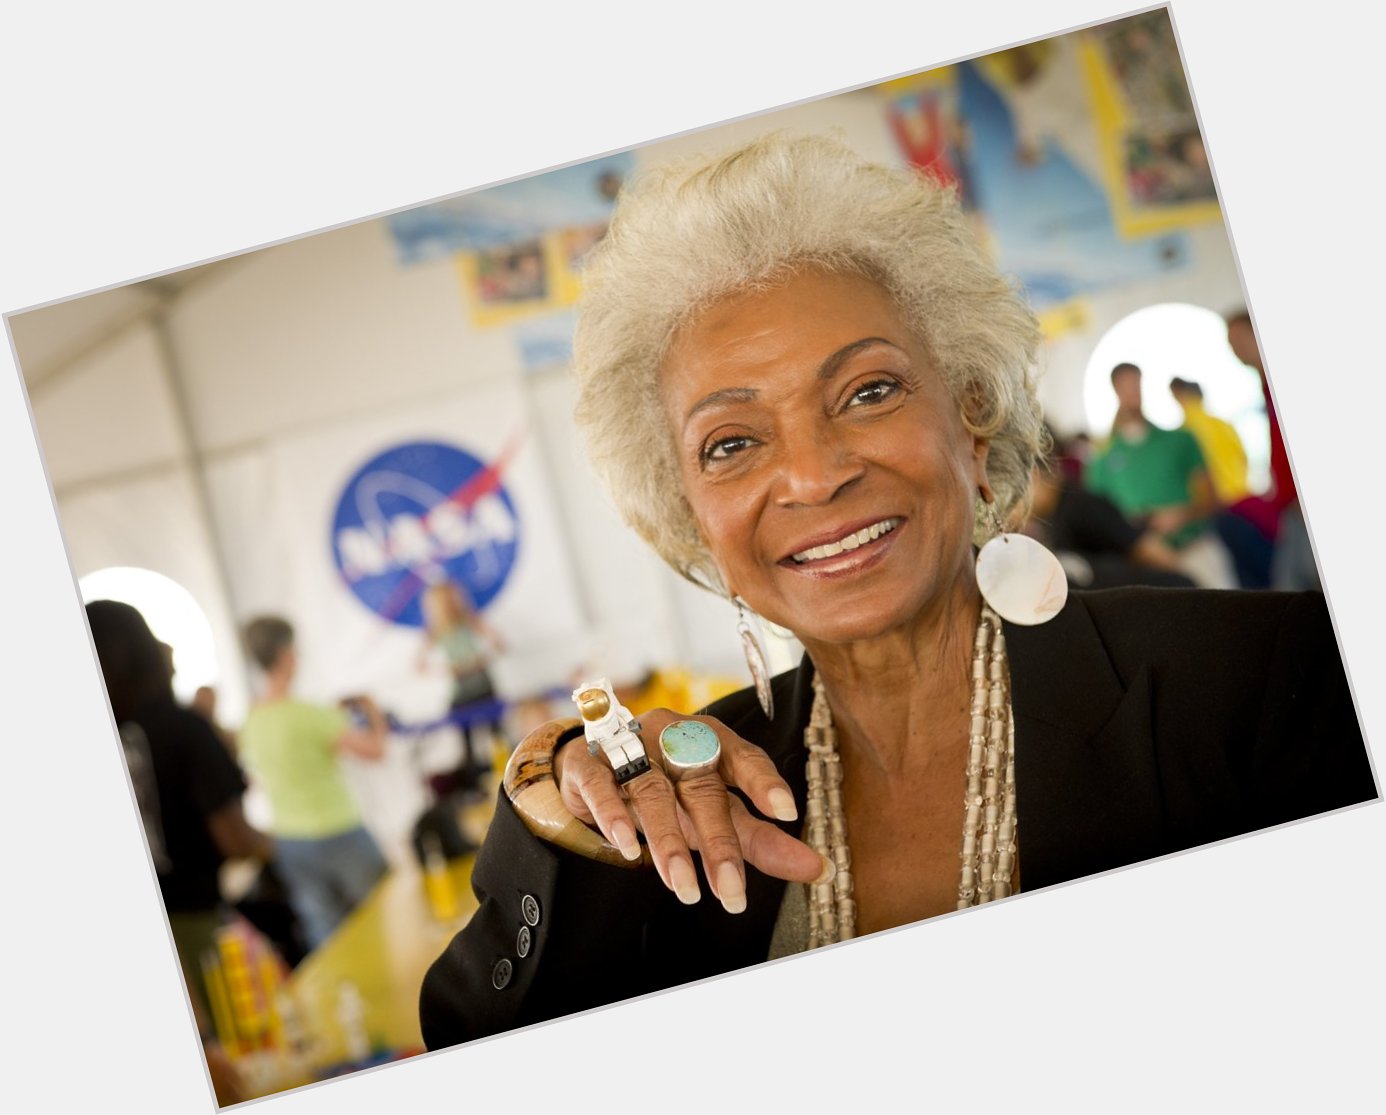 Happy Birthday to the best Communications Officer & a wonderful lady-- Nichelle Nichols! 